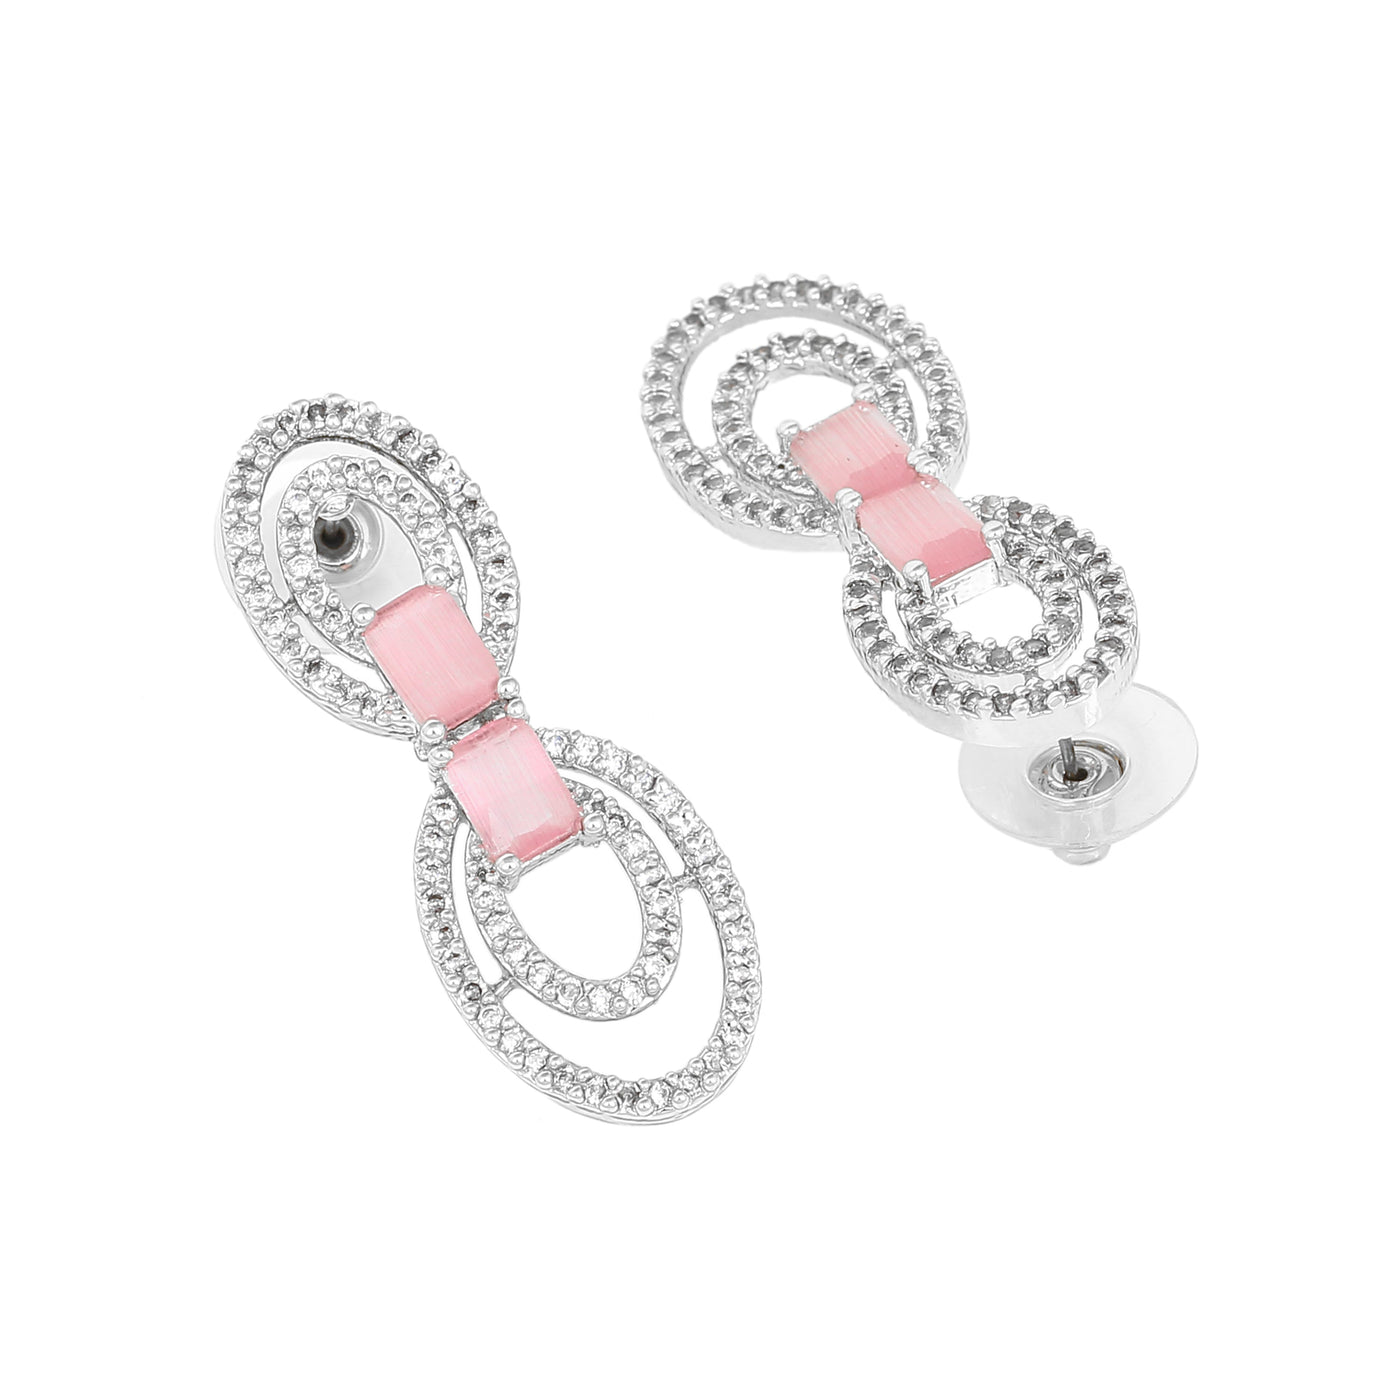 Estele Rhodium Plated CZ Circular Designer Drop Earrings with Mint Pink Stones for Women